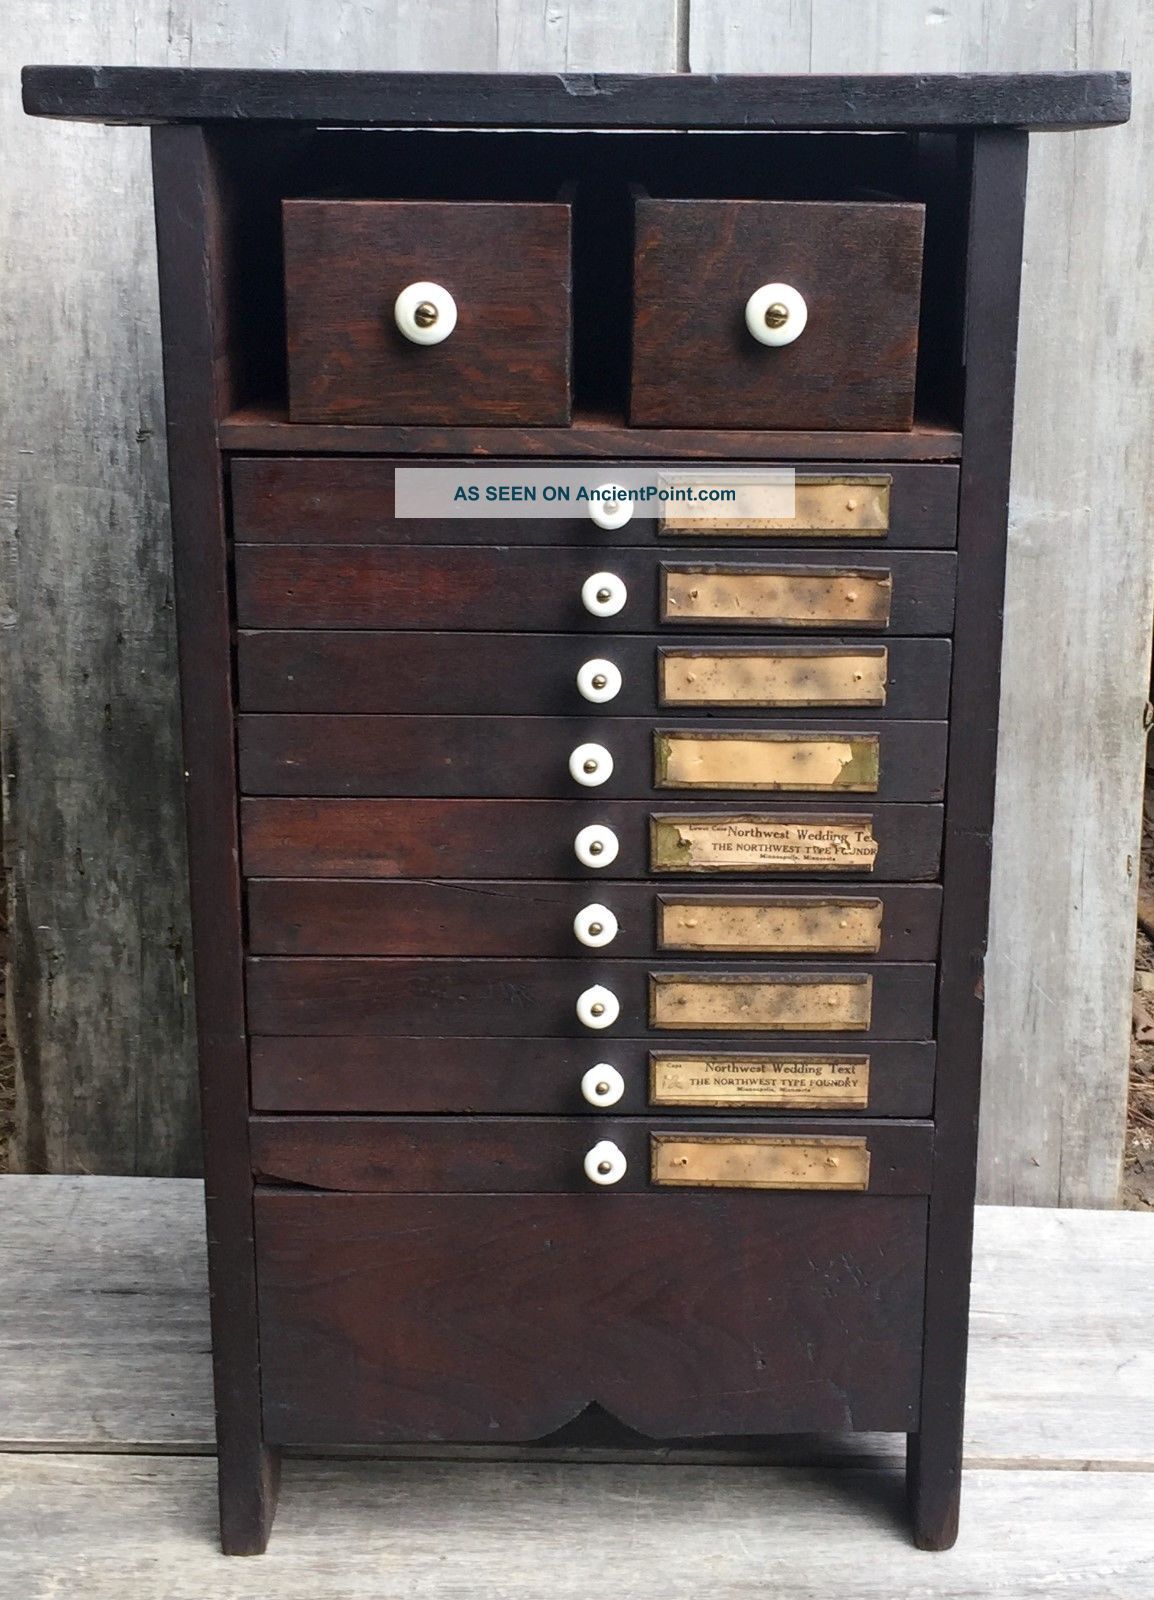 Antique Typesetters Printers Tray Cabinet Table W/ 9 Drawers & Cubby Shelf 1870 1900-1950 photo